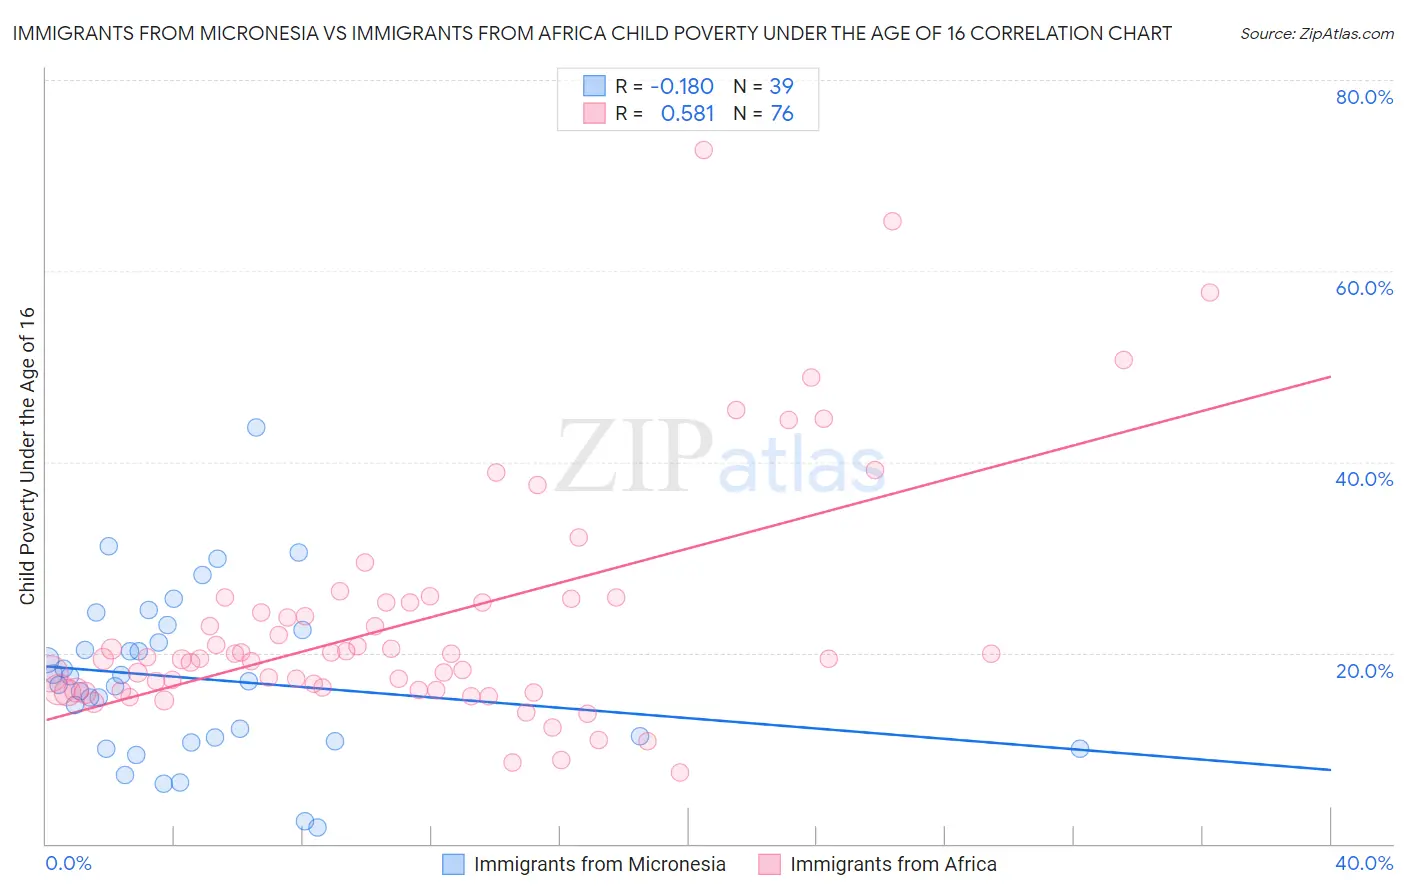 Immigrants from Micronesia vs Immigrants from Africa Child Poverty Under the Age of 16